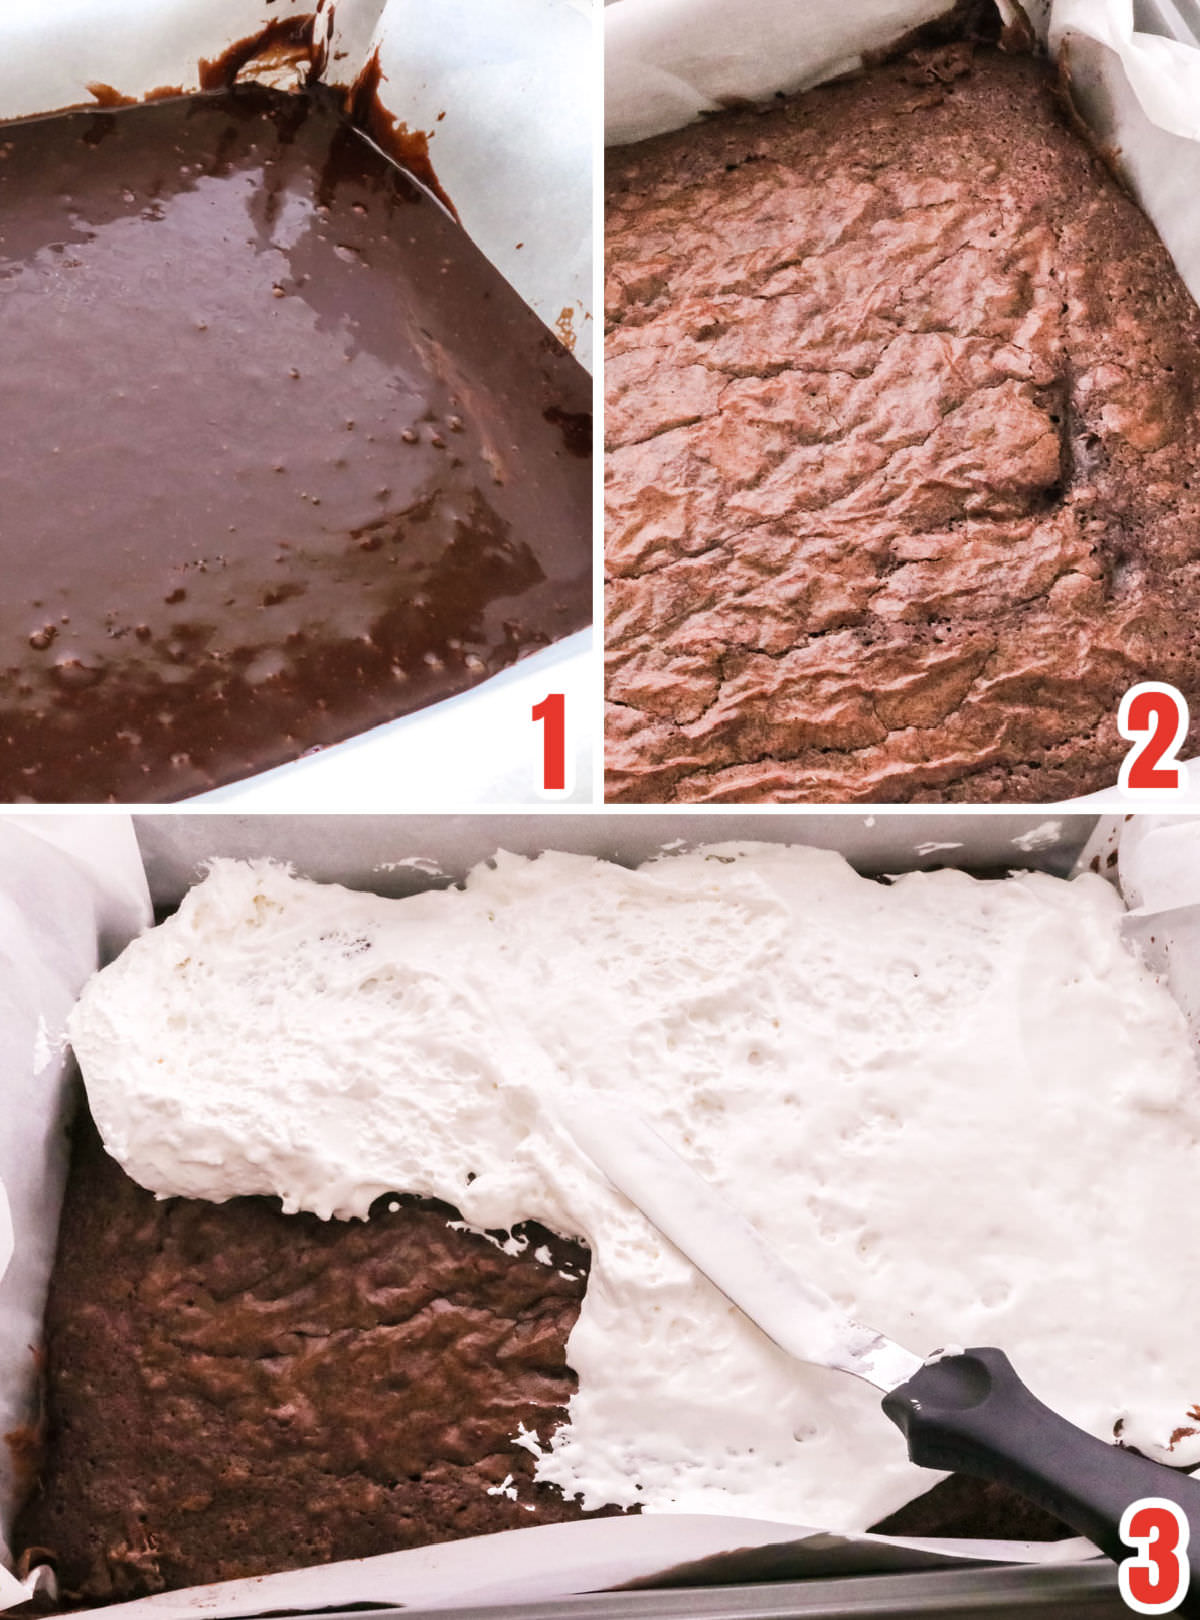 Collage image showing the steps for making the brownie batter, baking the brownies and covering the brownies with marshmallow creme.